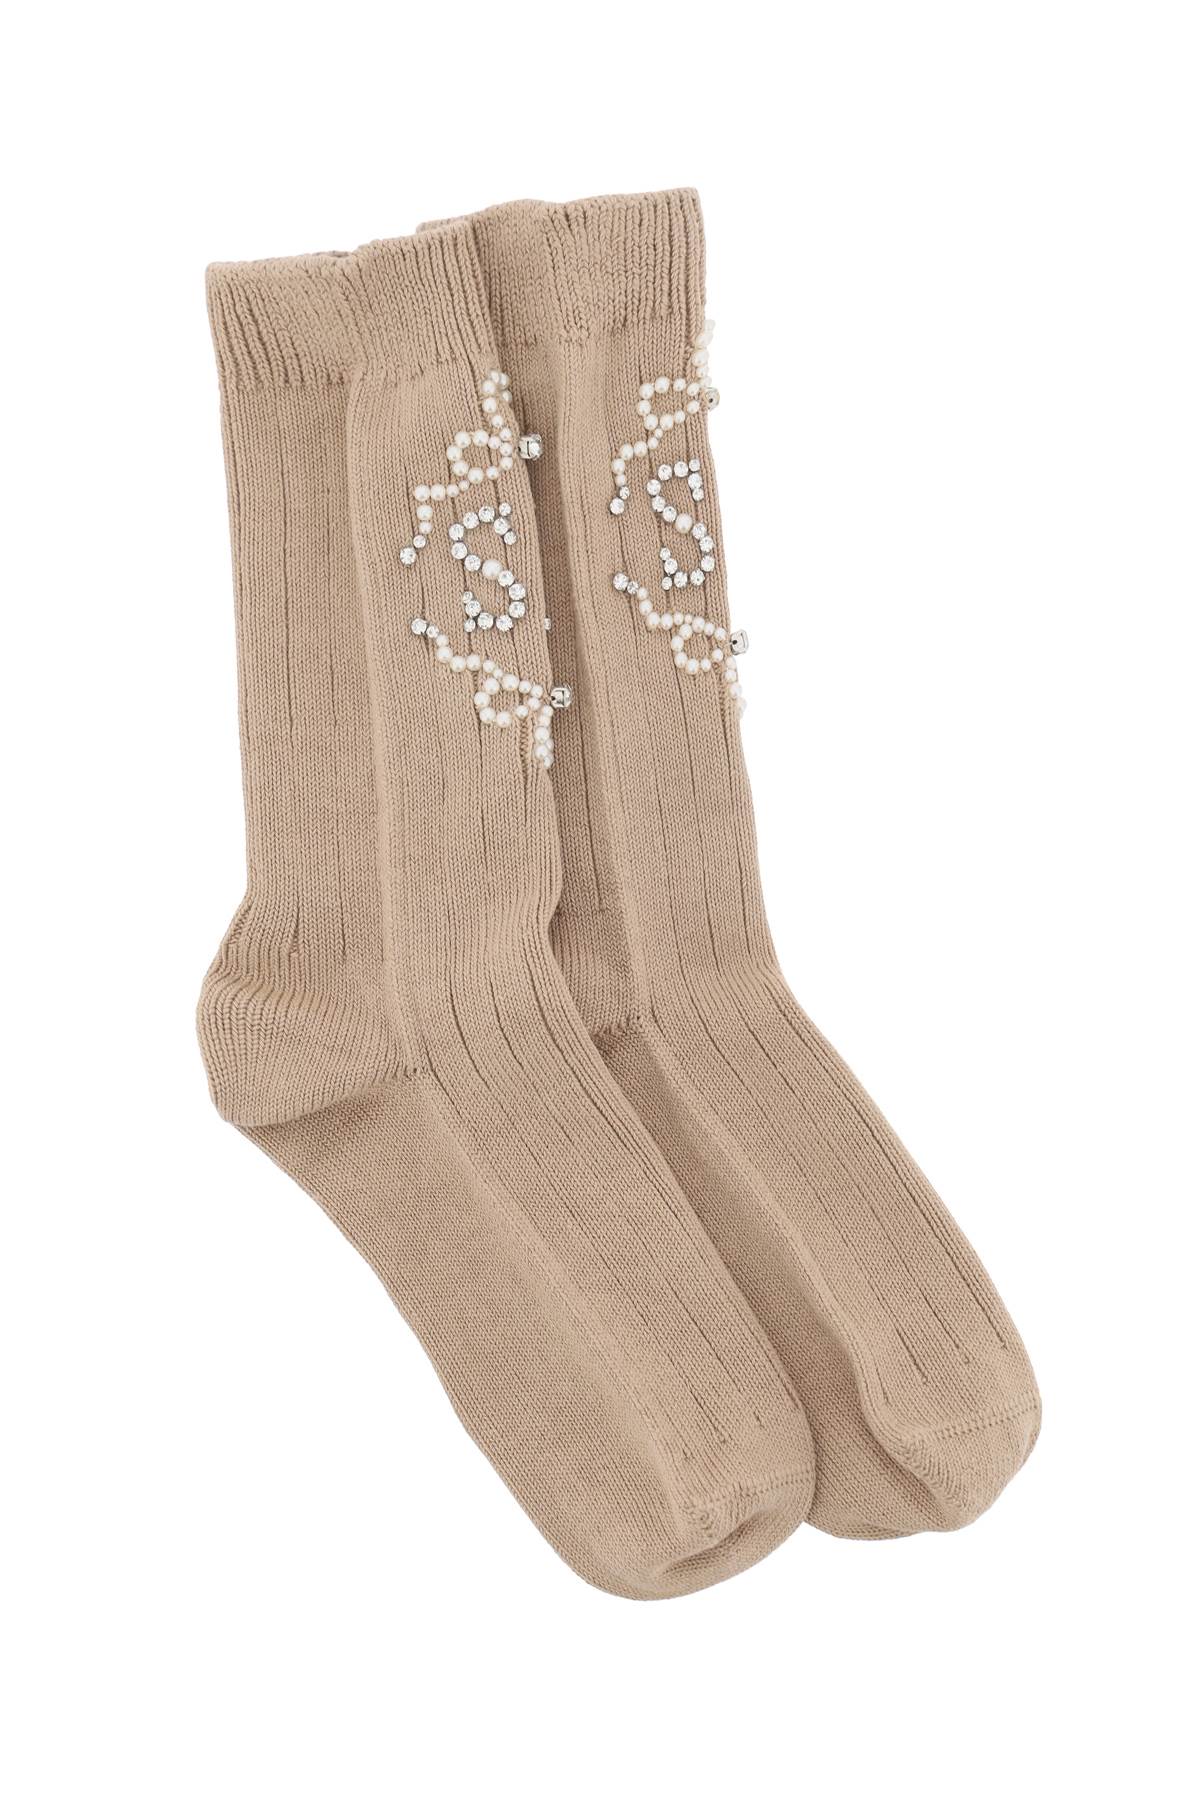 Sr Socks With Pearls And Crystals